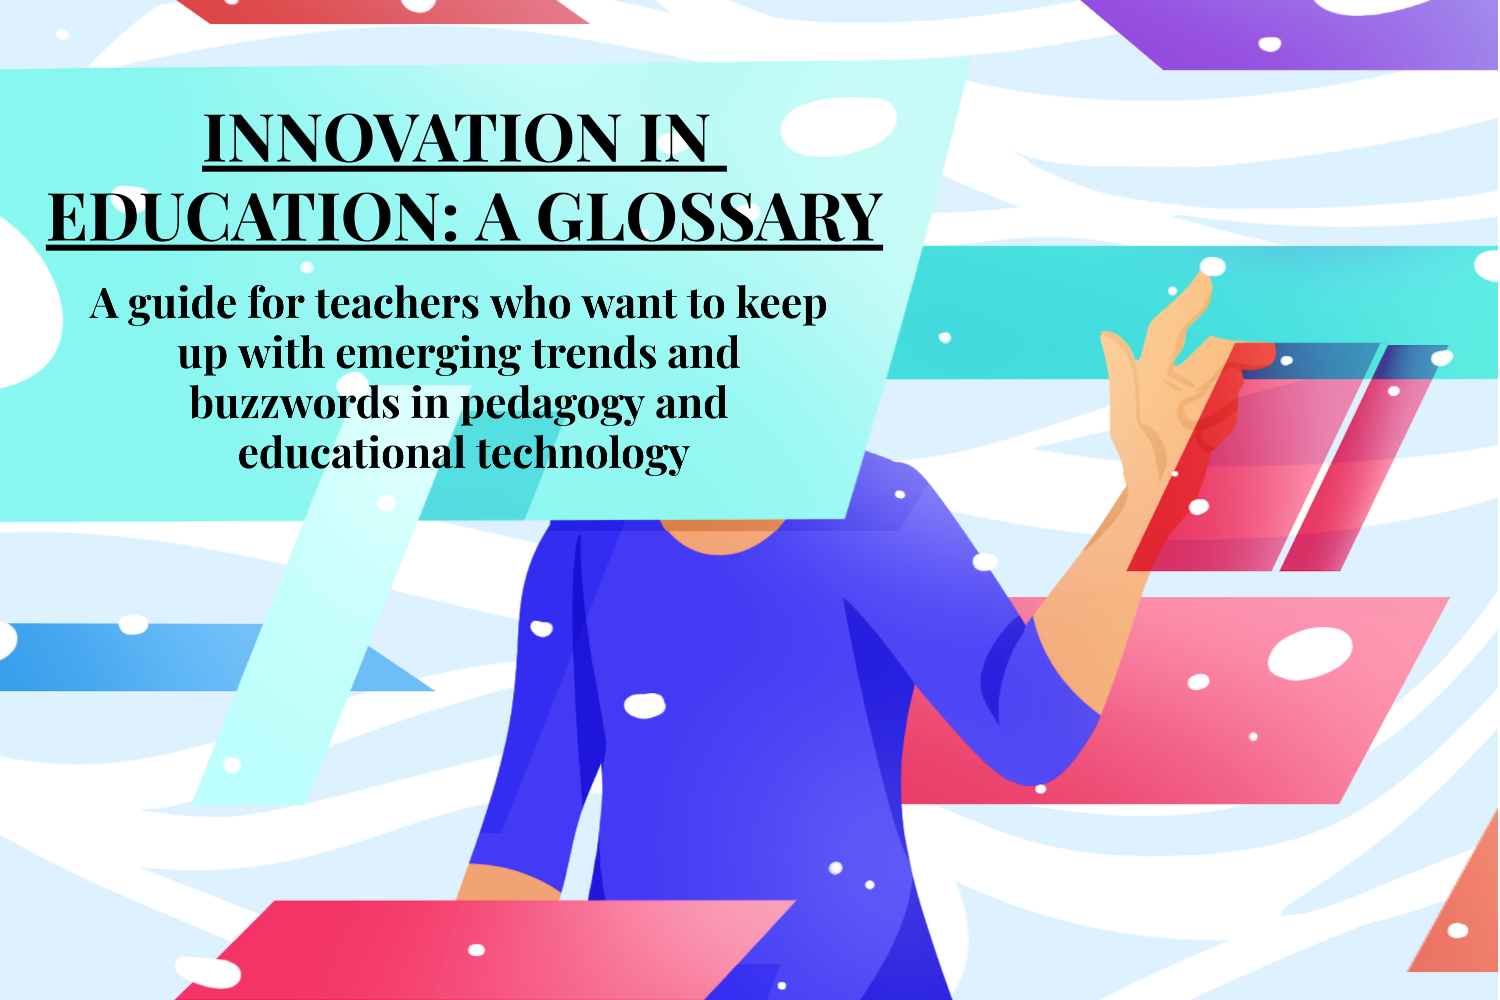 Innovation in education: A glossary